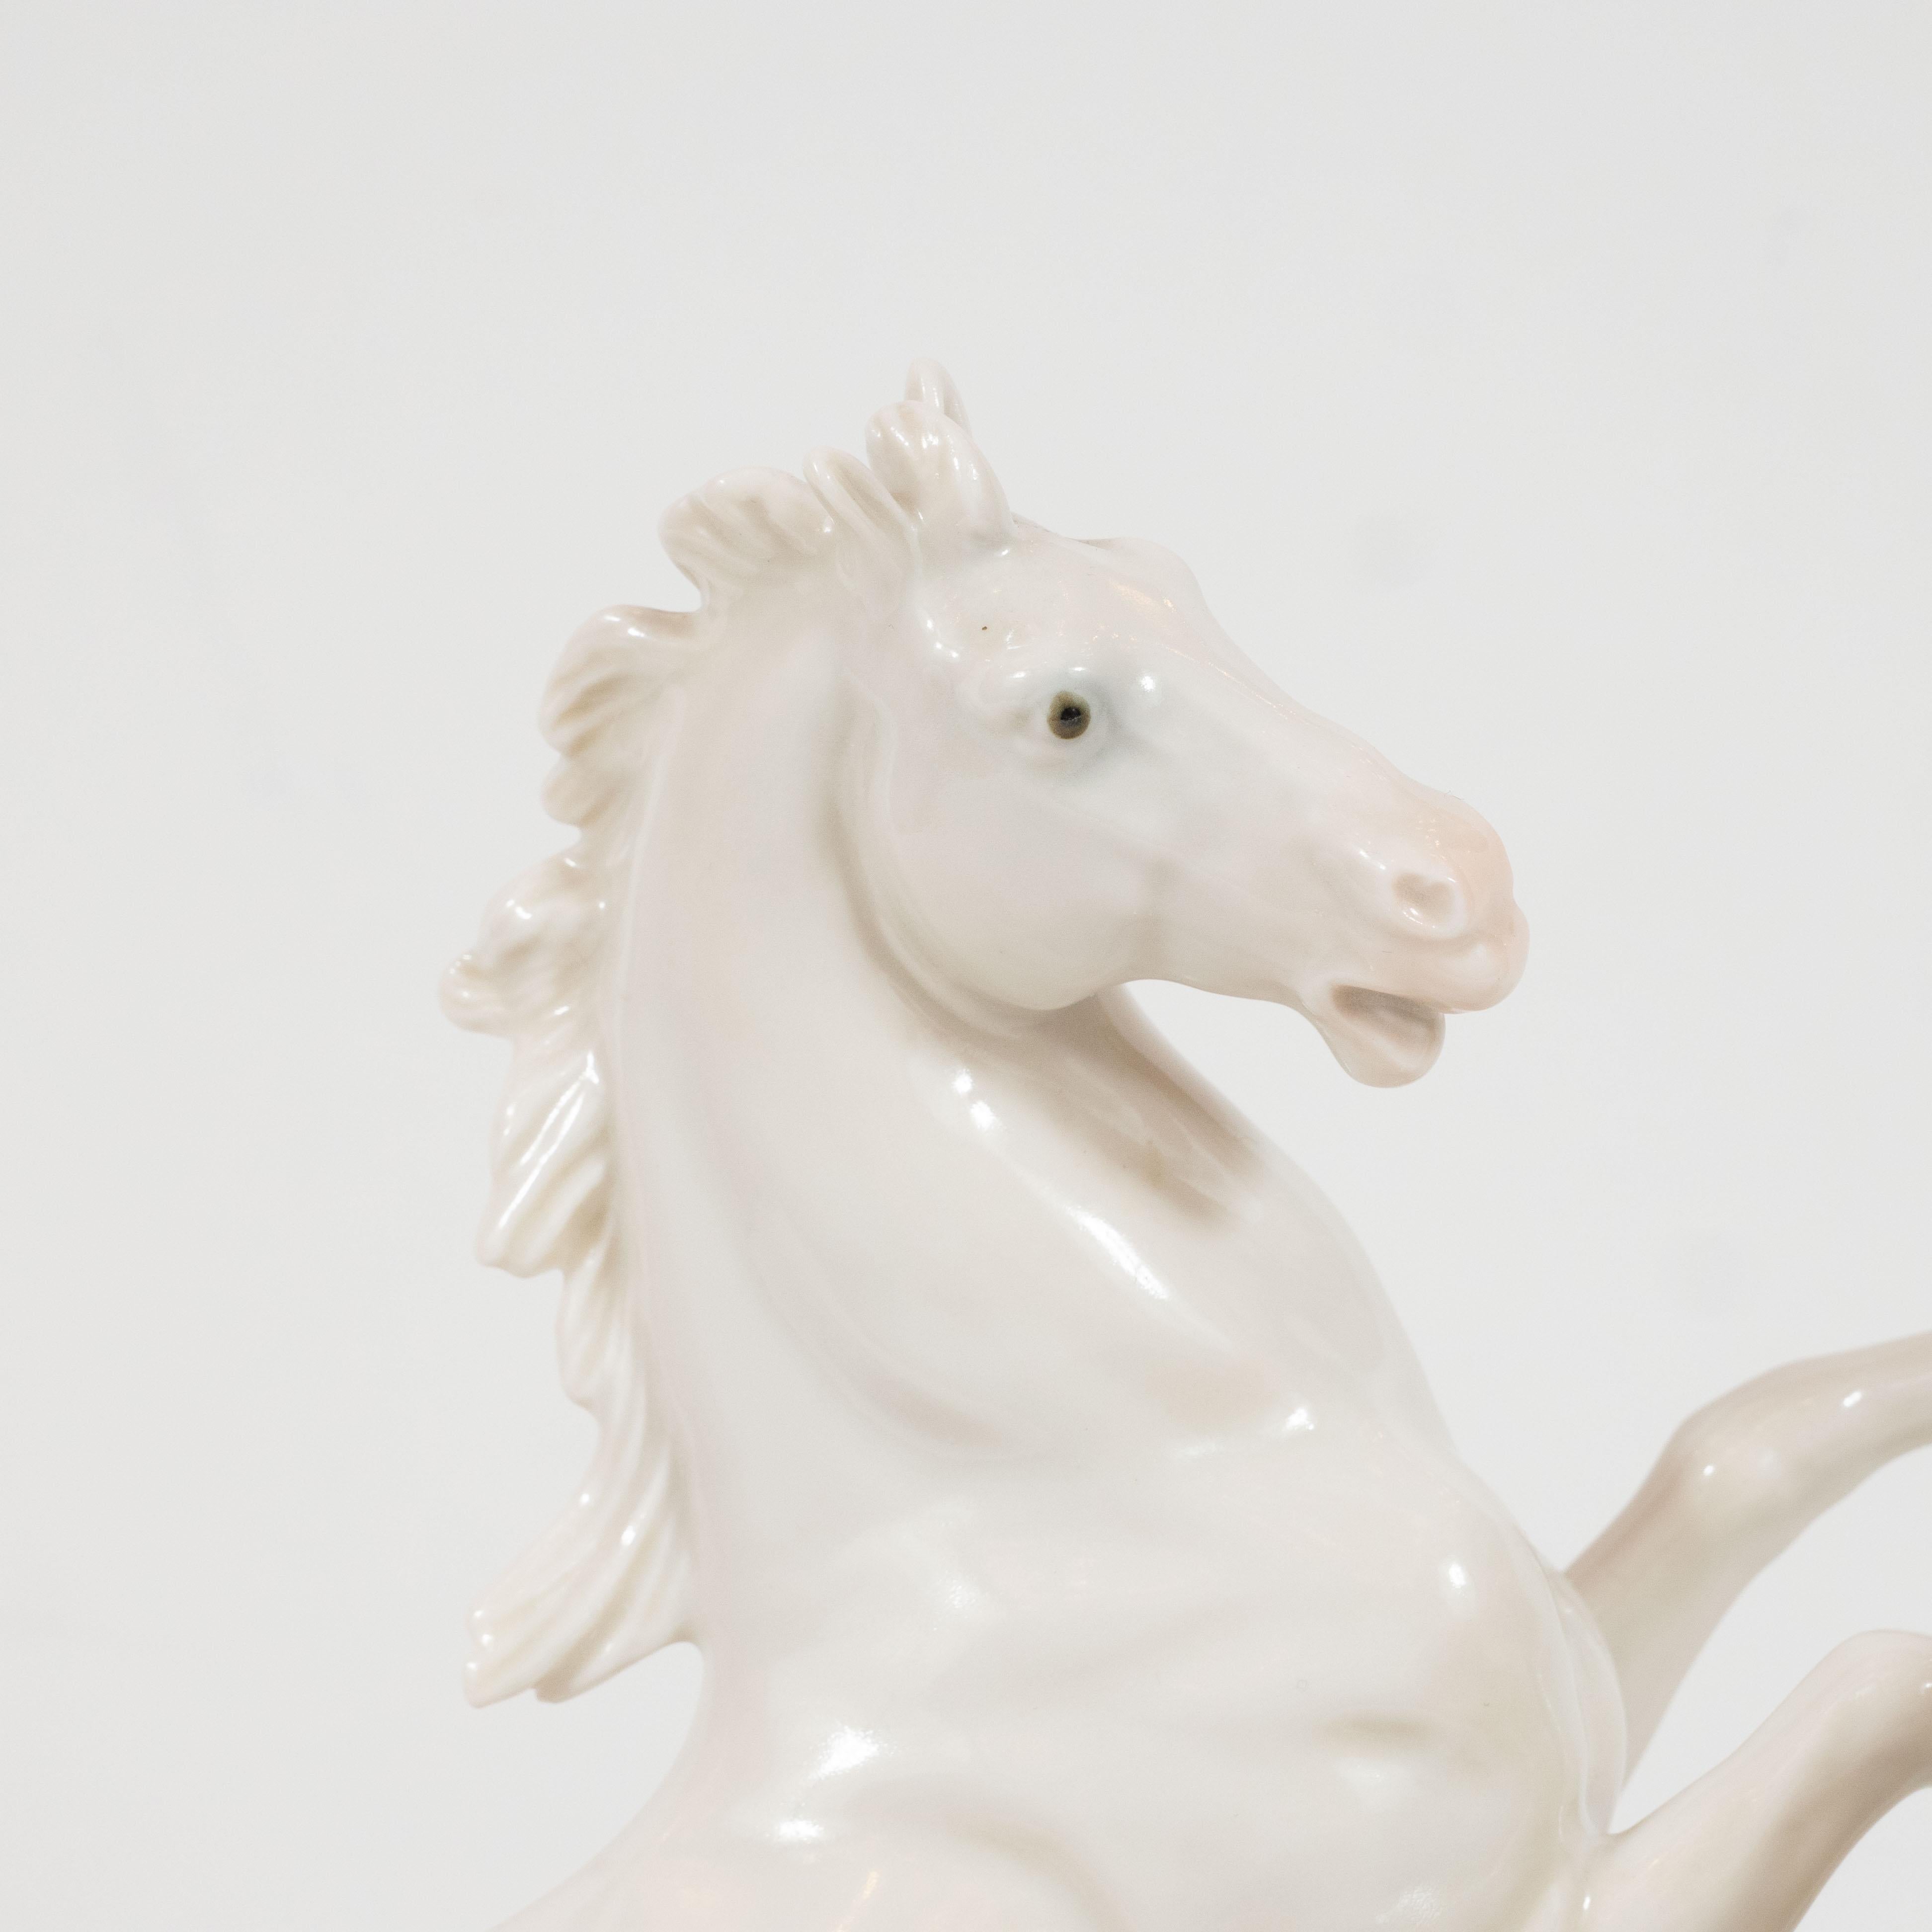 This stunning and dynamic white porcelain sculpture was realized by the esteemed artisan Karl Ens in East Germany, circa 1930. It depicts two galloping horses- a stallion and a mare- in white porcelain with gray-blue eyes, offering the only flash of